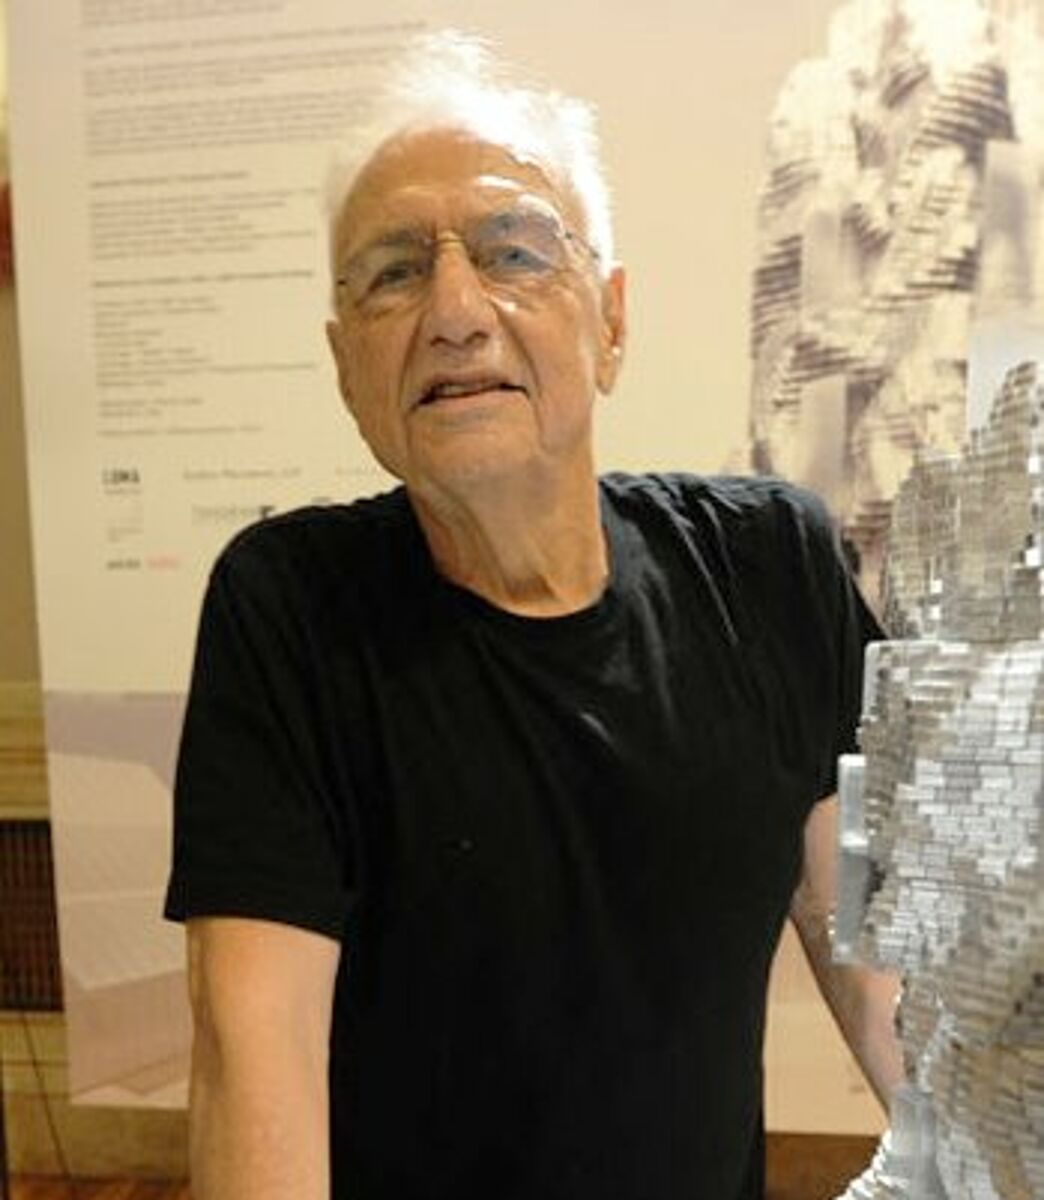 Frank Gehry - Famous Architect